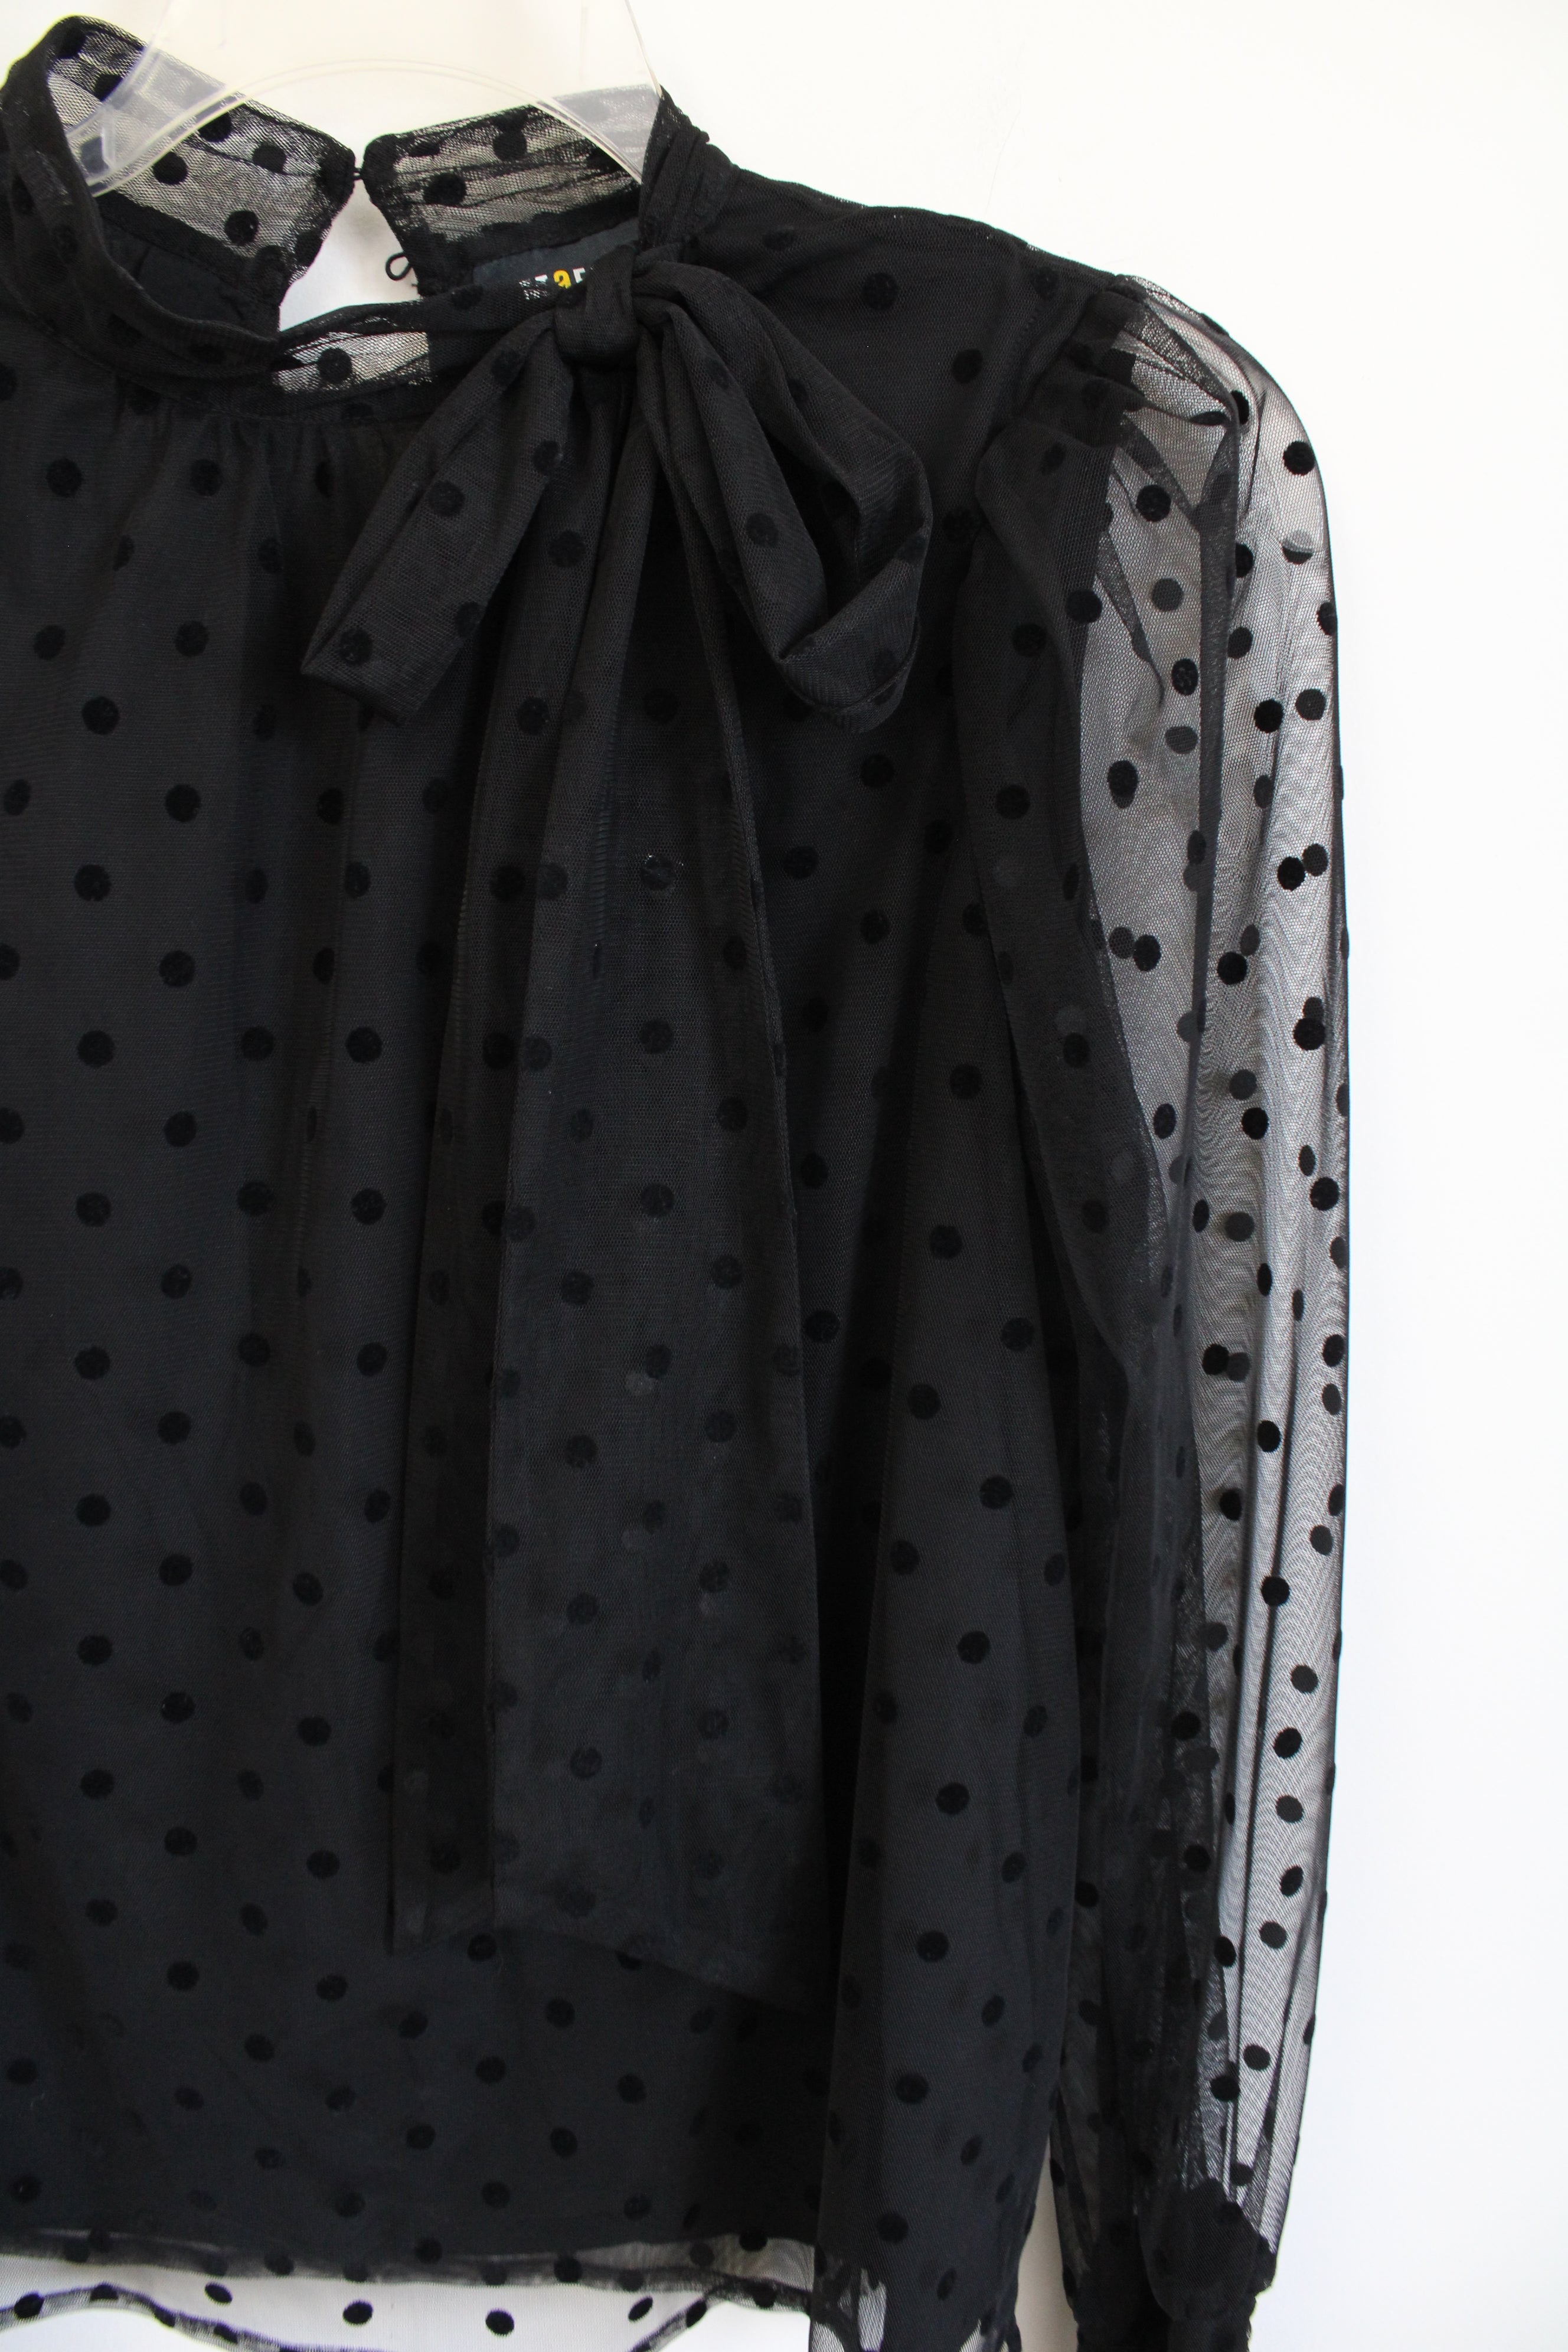 Maeve By Anthropologie Neck-Tie Black Tulle Polka Dot Top | S